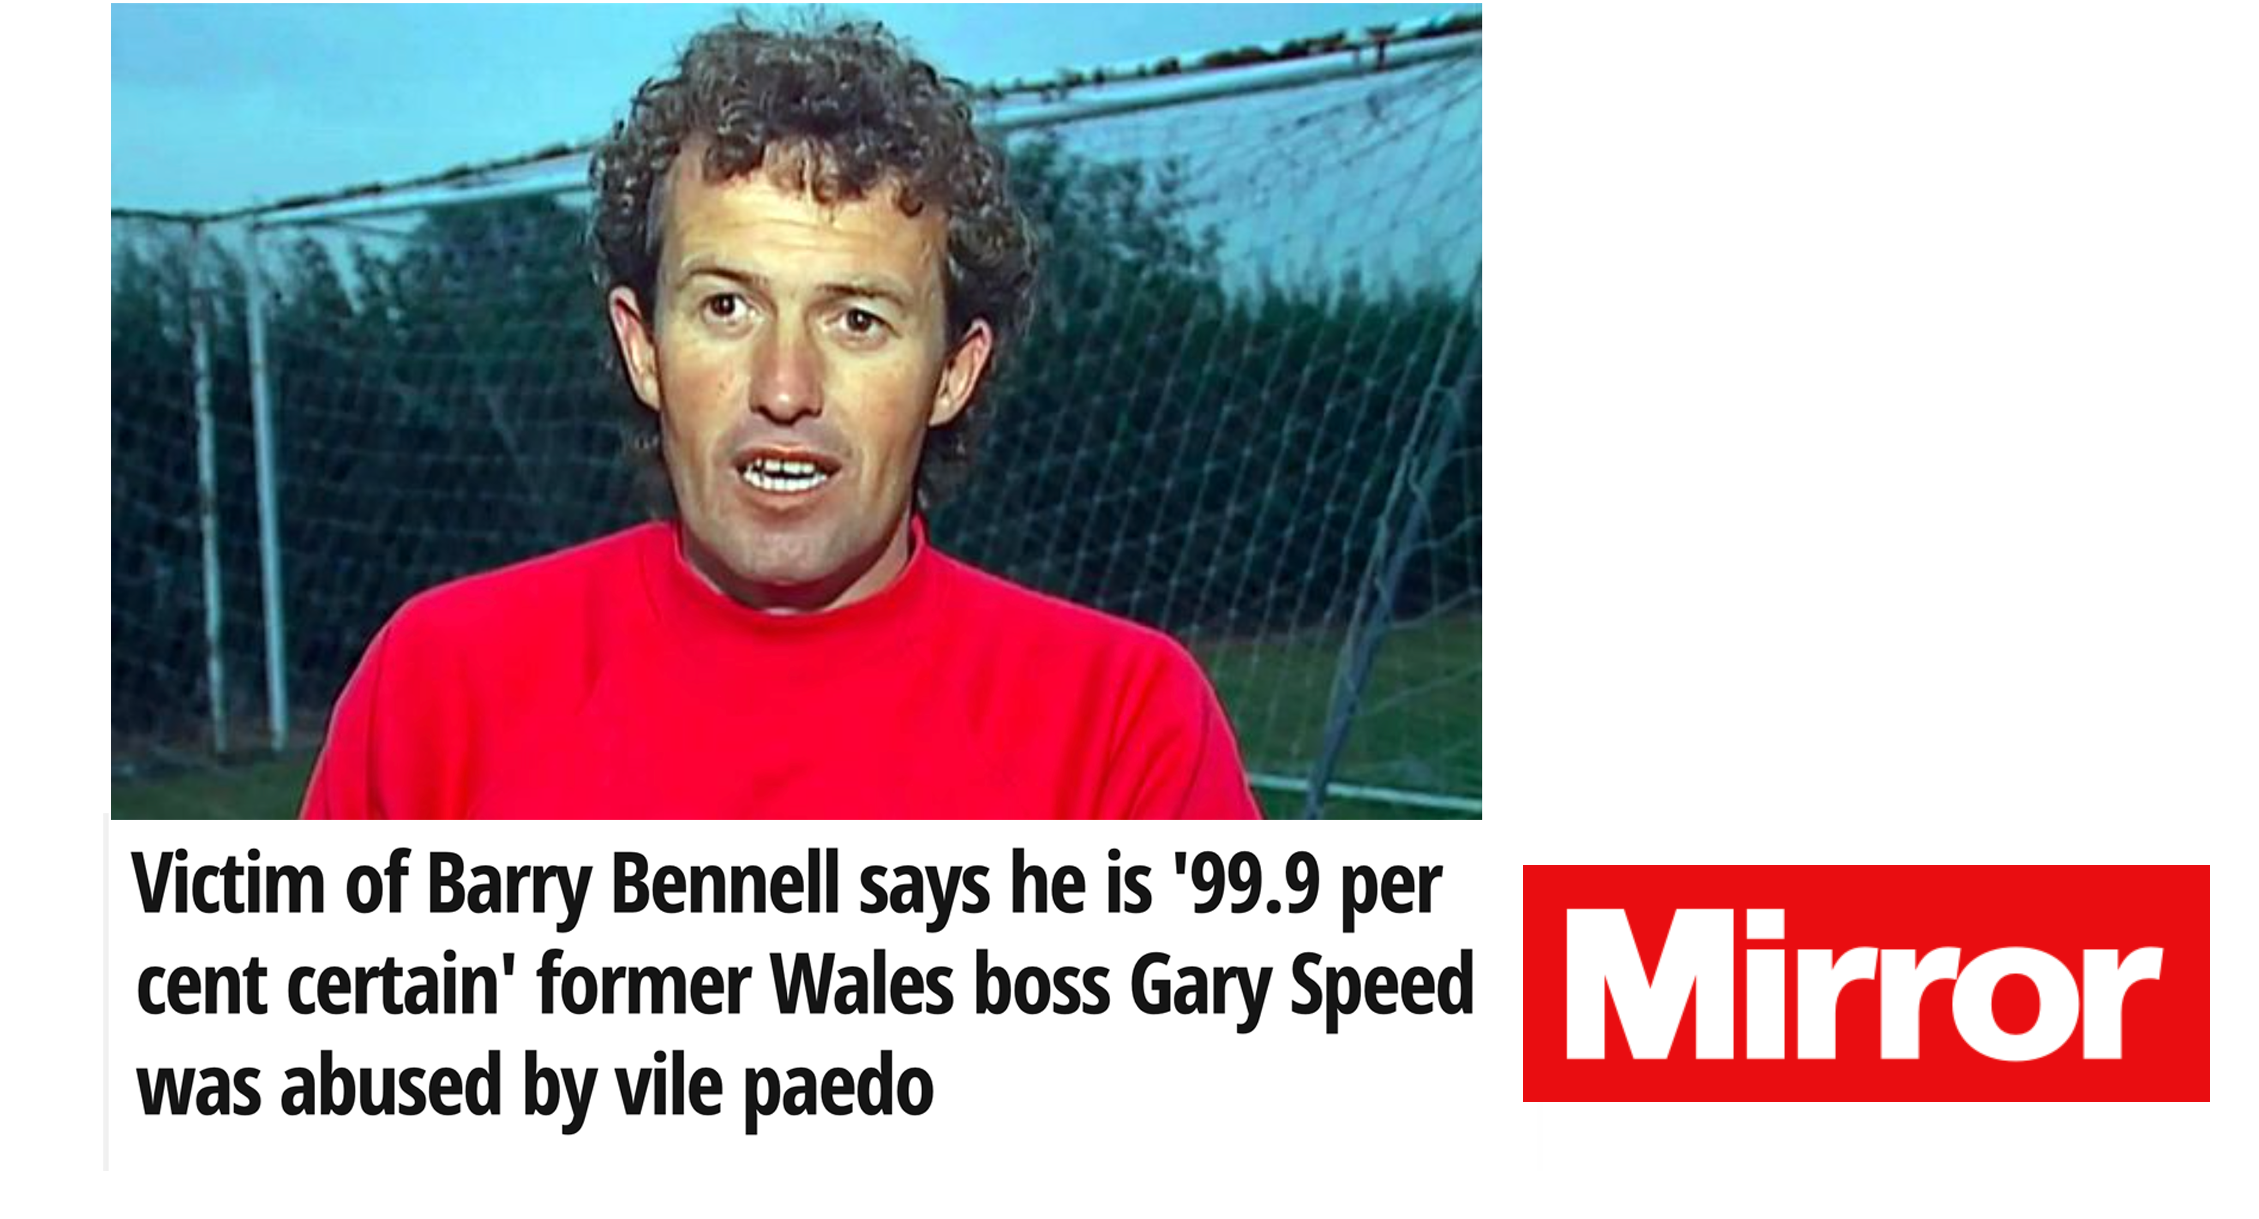 Victim of Barry Bennell says he is ‘99.9 per cent certain’ former Wales boss Gary Speed was abused by vile paedo